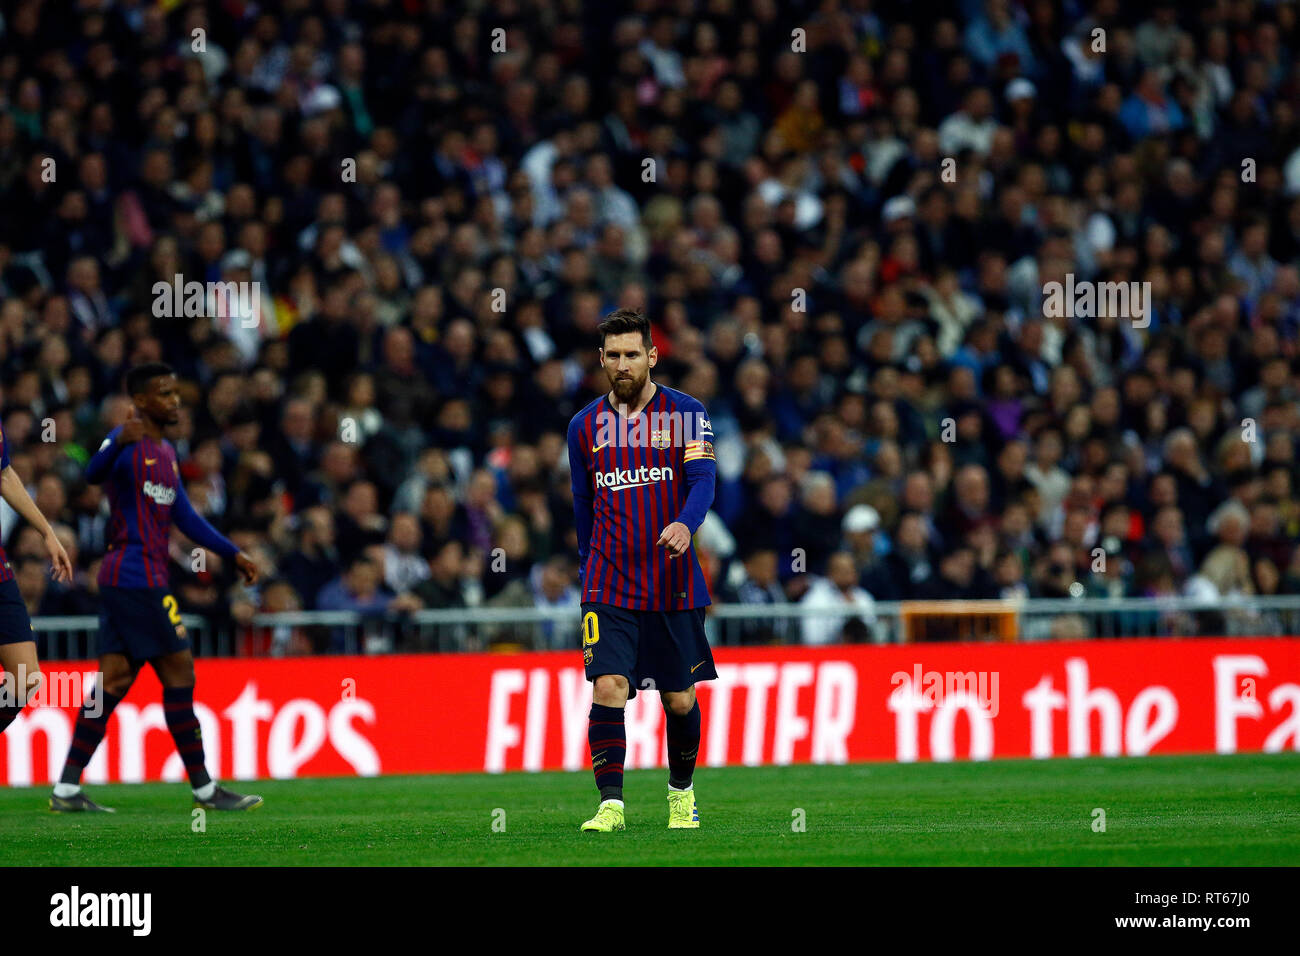 Lionel Messi in action during the Copa del Rey semi final second leg match  between Real Madrid CF and FC Barcelona at Santiago Bernabeu Stadium.  (Final score Real Madrid 0-3 FC Barcelona